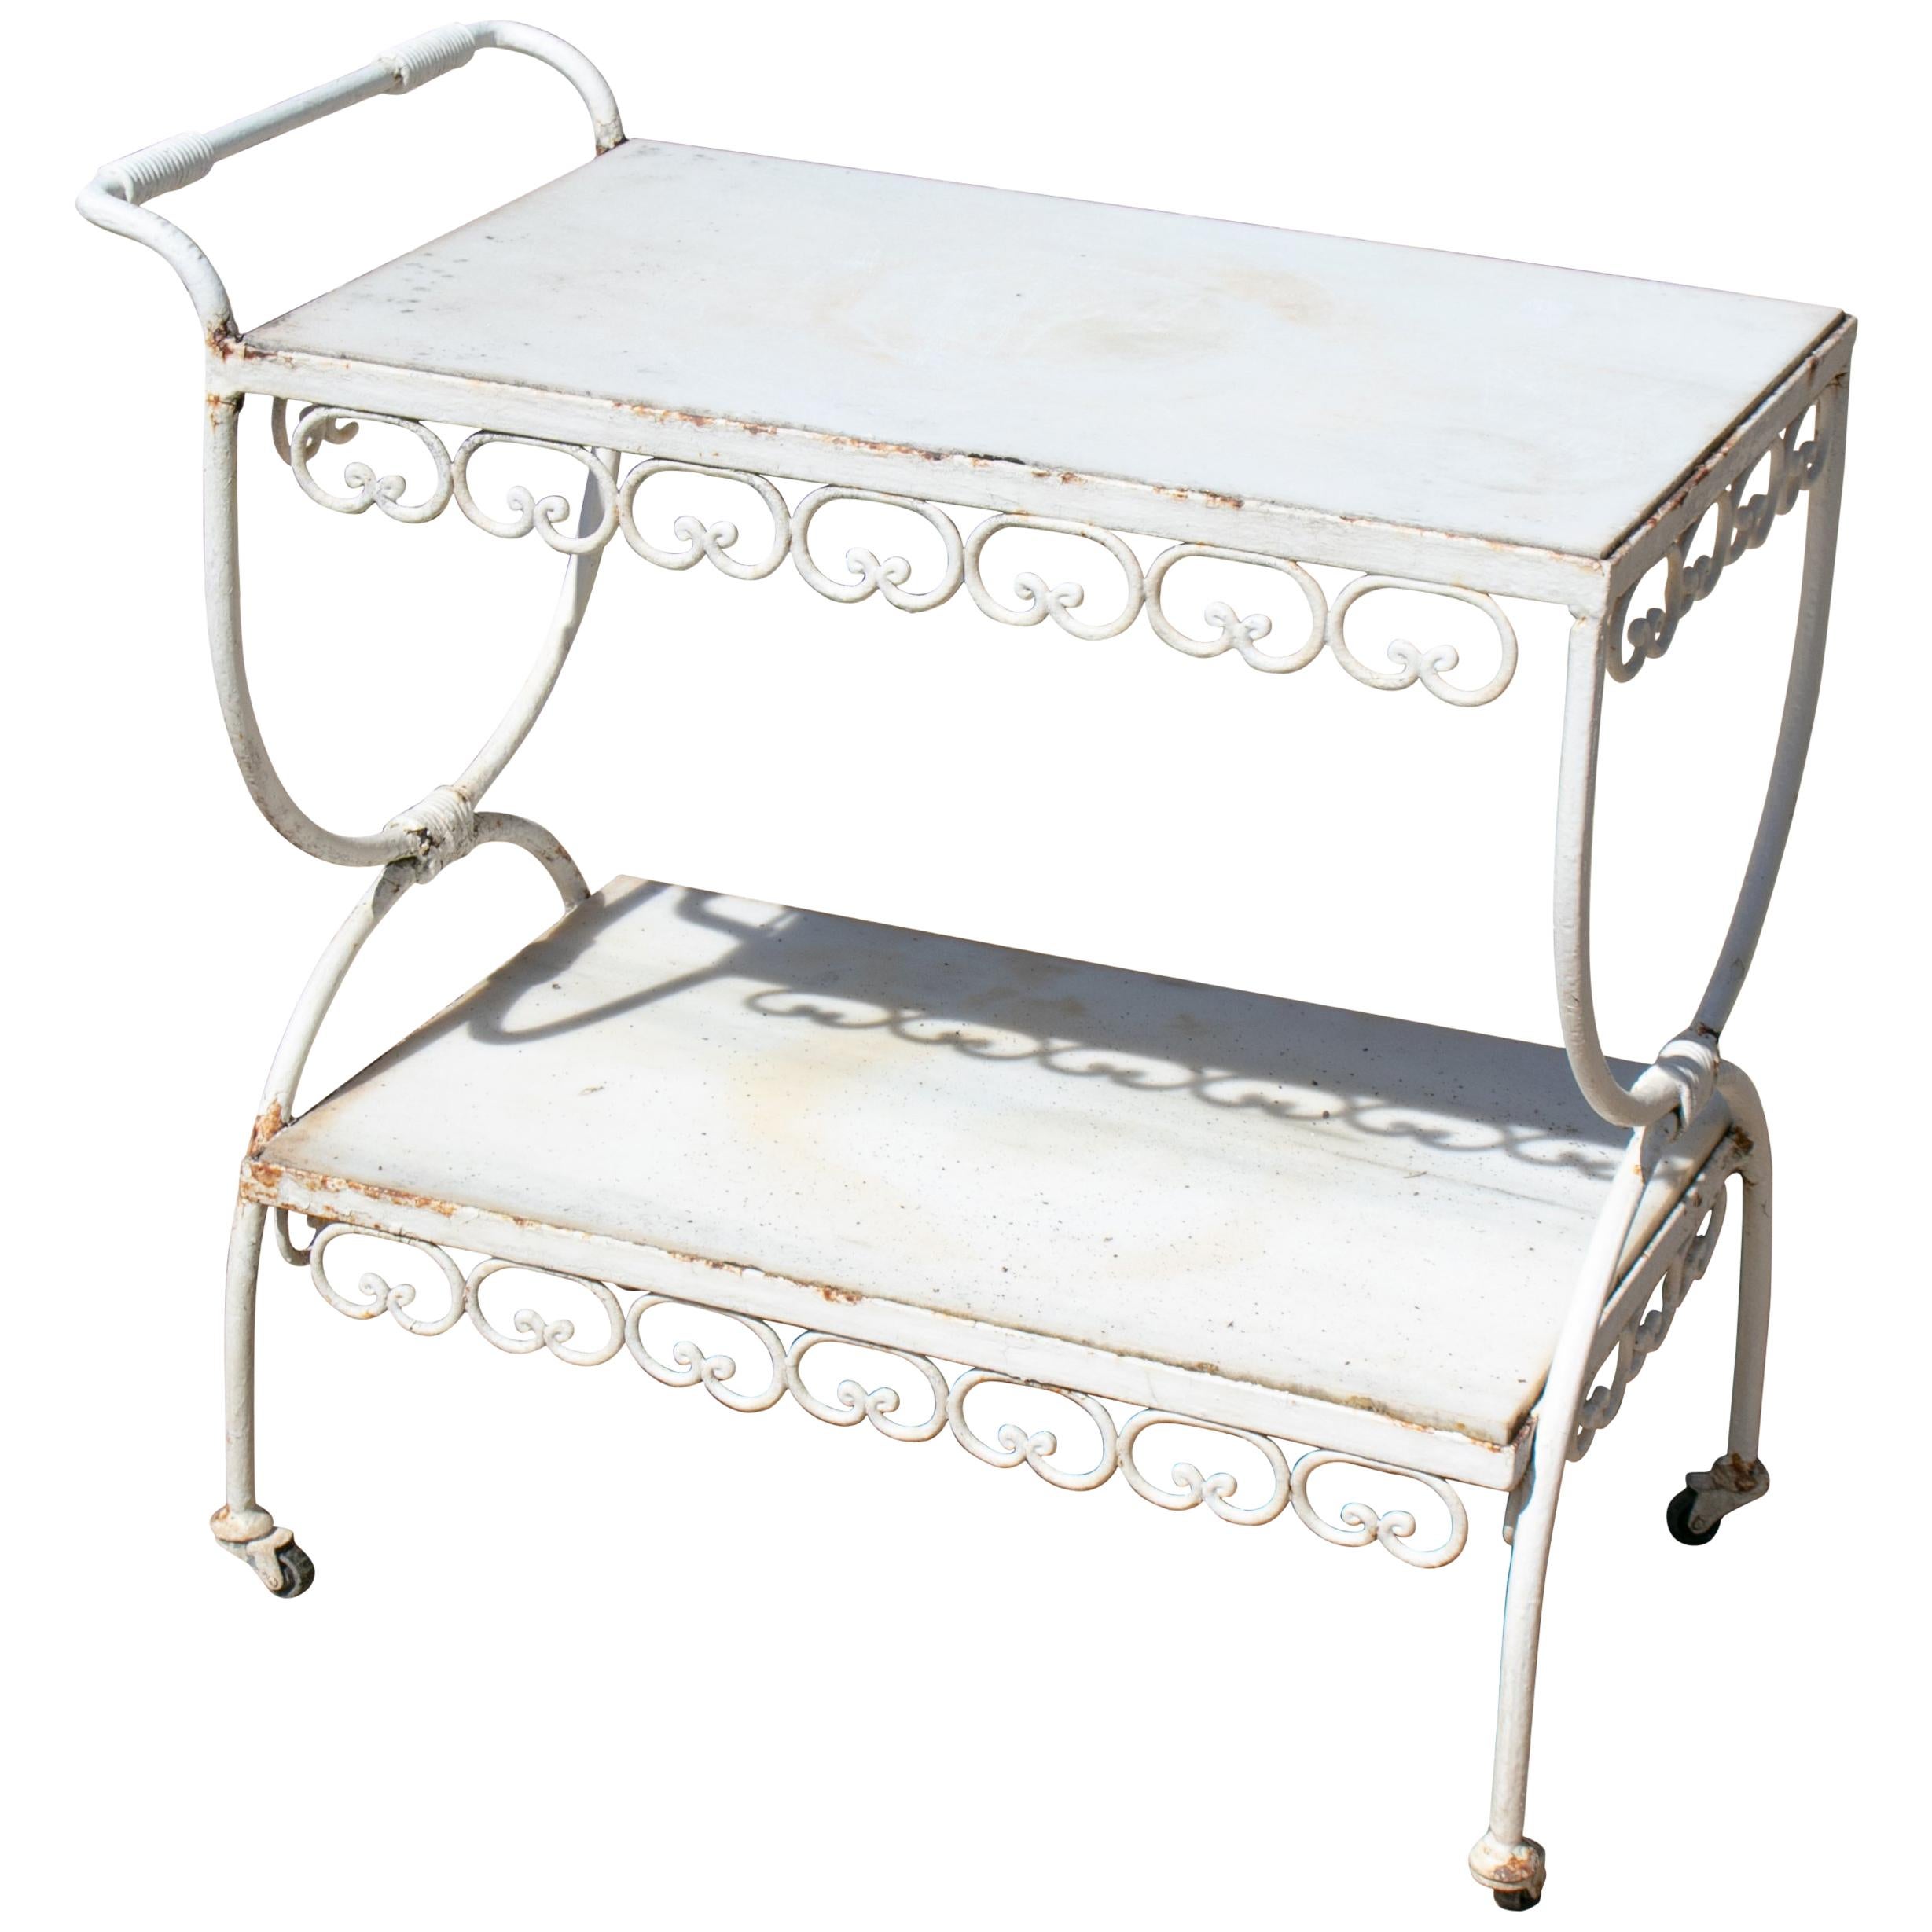 1970s Spanish Iron Drinks Trolley with Marble Shelves